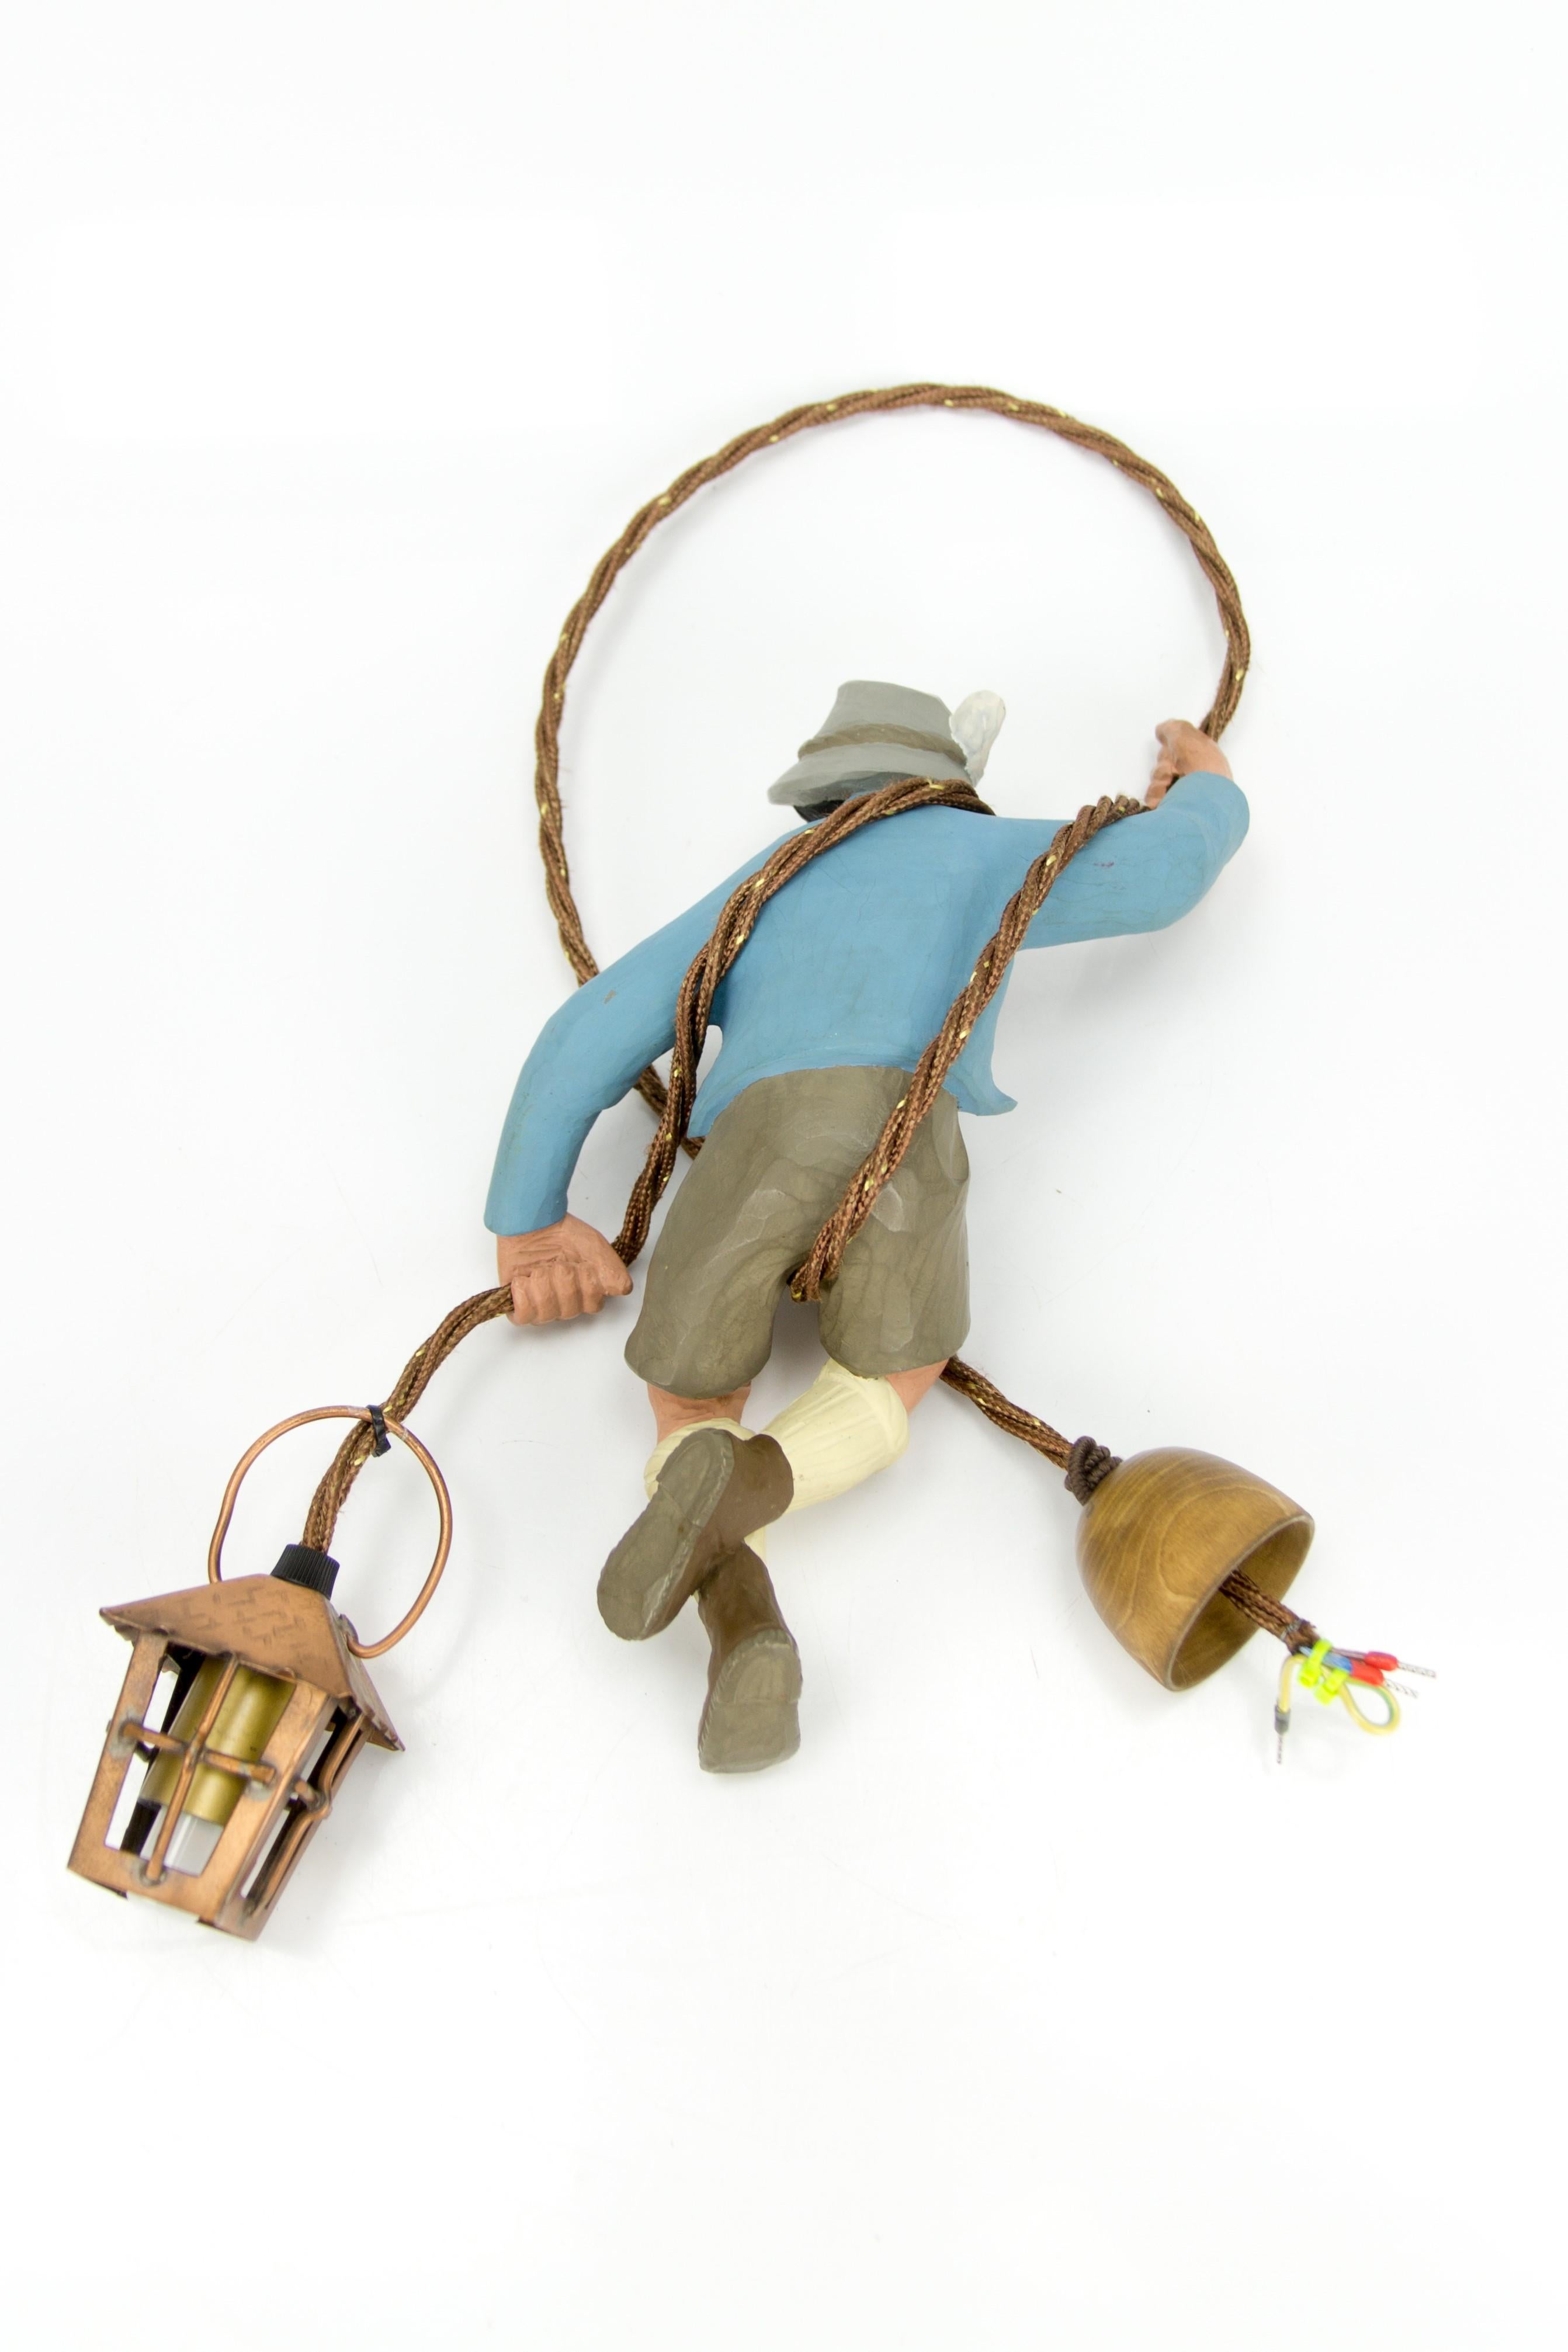 German Hand Carved and Painted Figure Bavarian Mountain Climber with Lantern 6